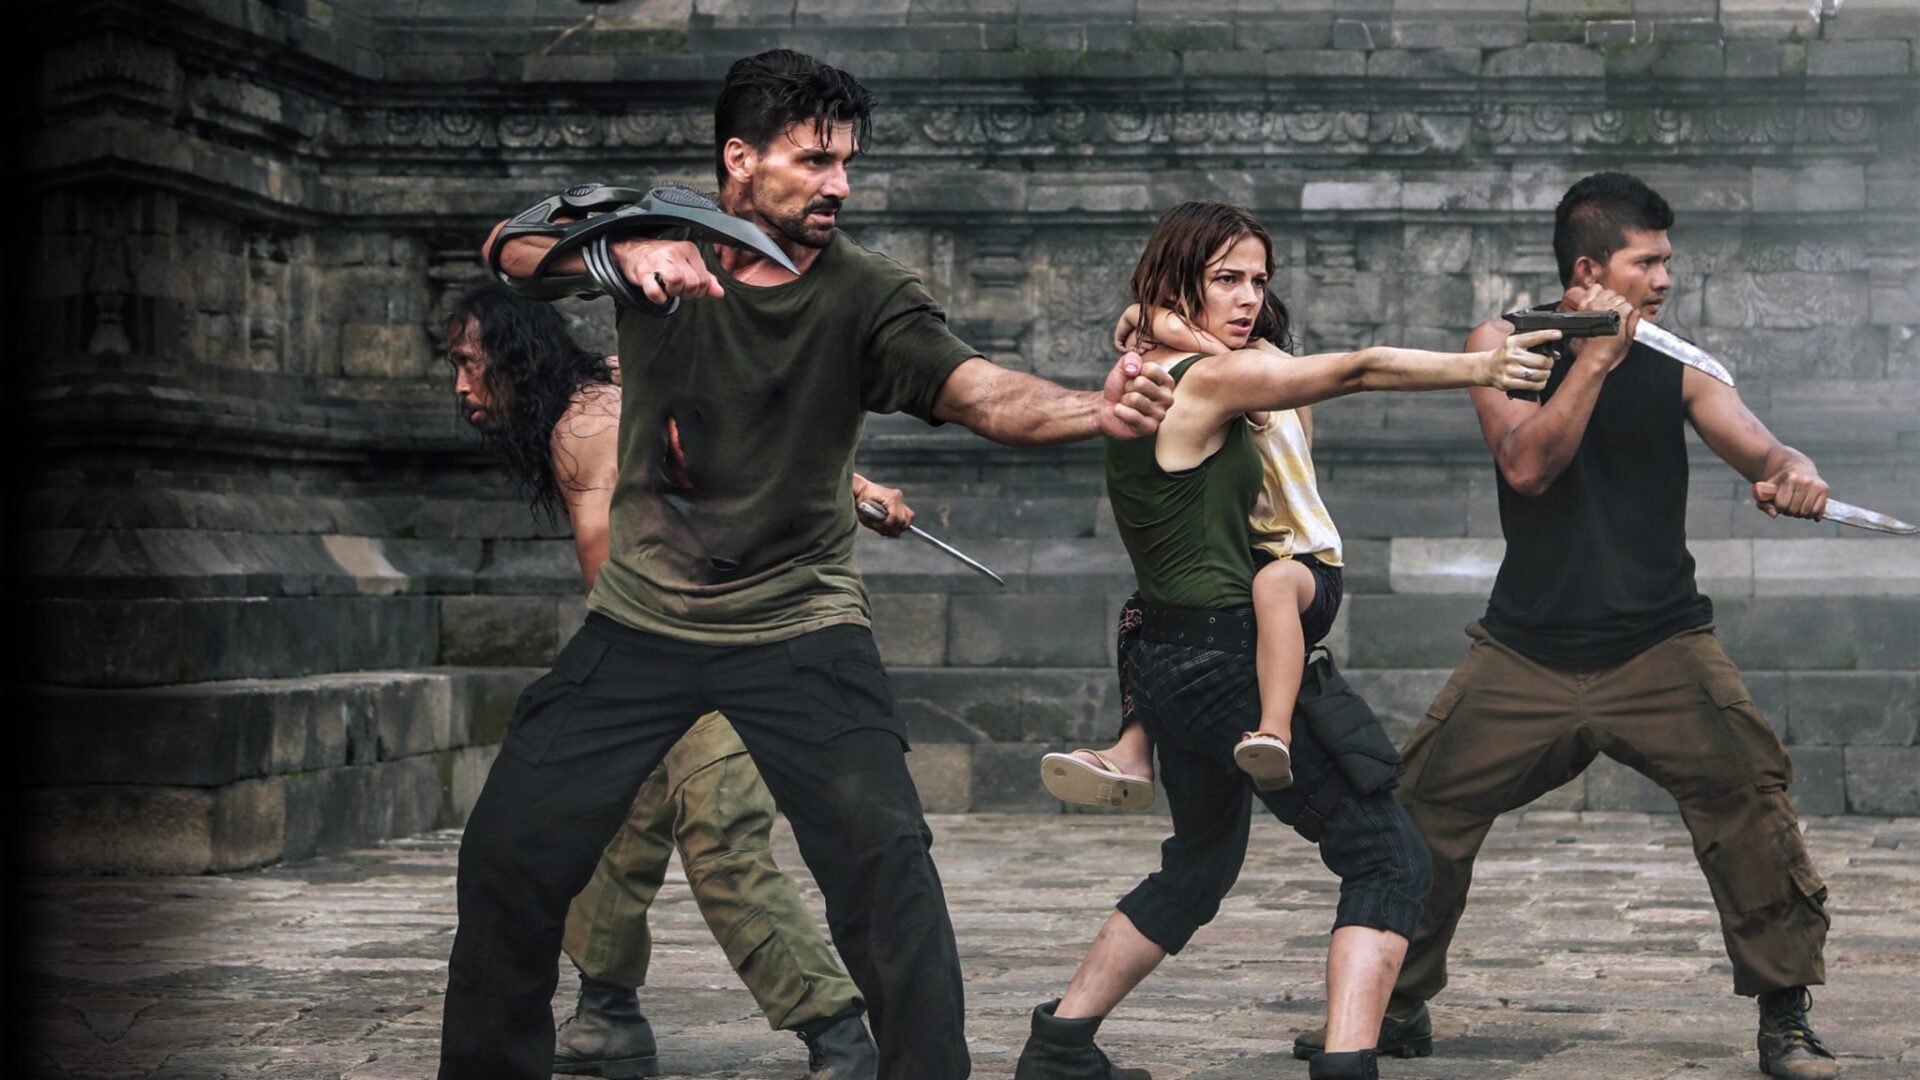 ‘Beyond Skyline’ is the most audacious sci-fi thriller of the year